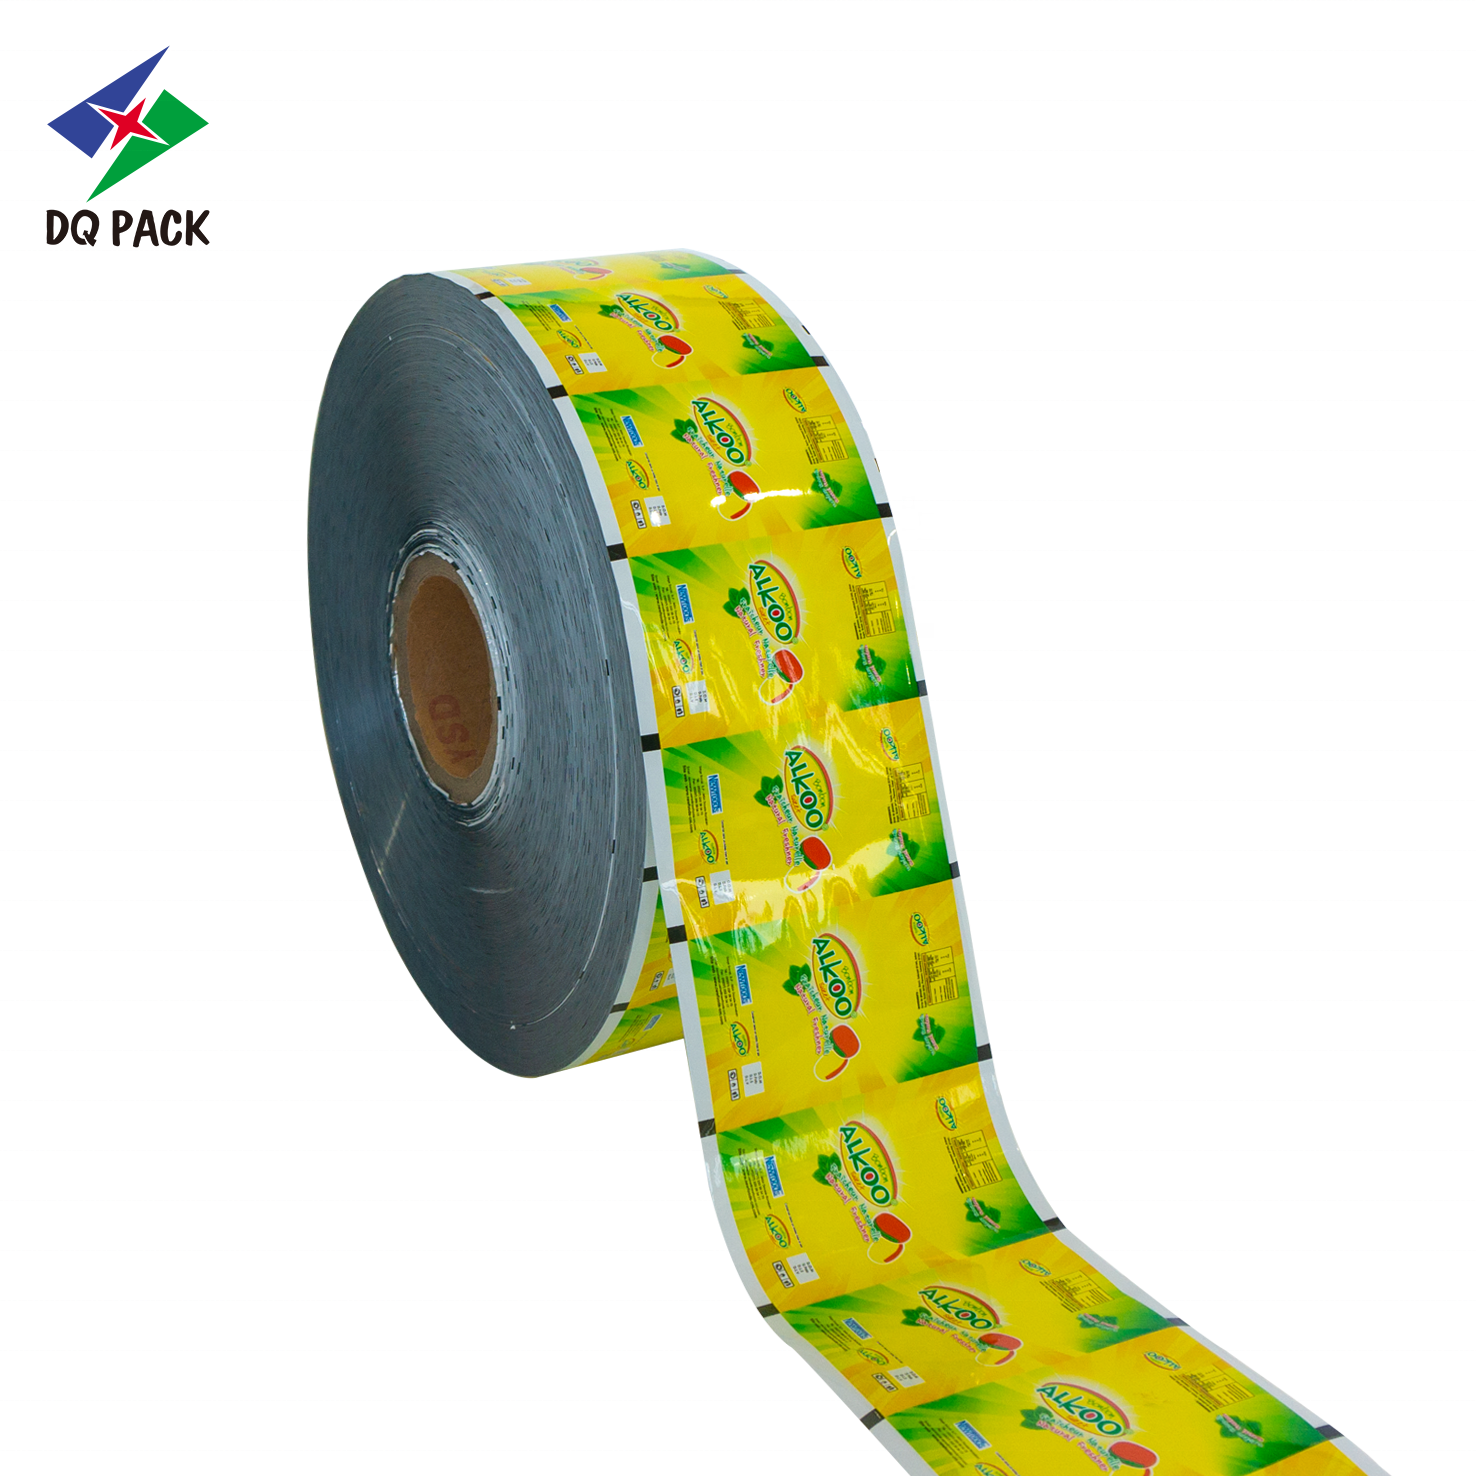 DQ PACK China Supplier Snack Biscuit Candy Nut Potato Chips Roll Stock Film Aluminum Foil Food Packaging Roll Film